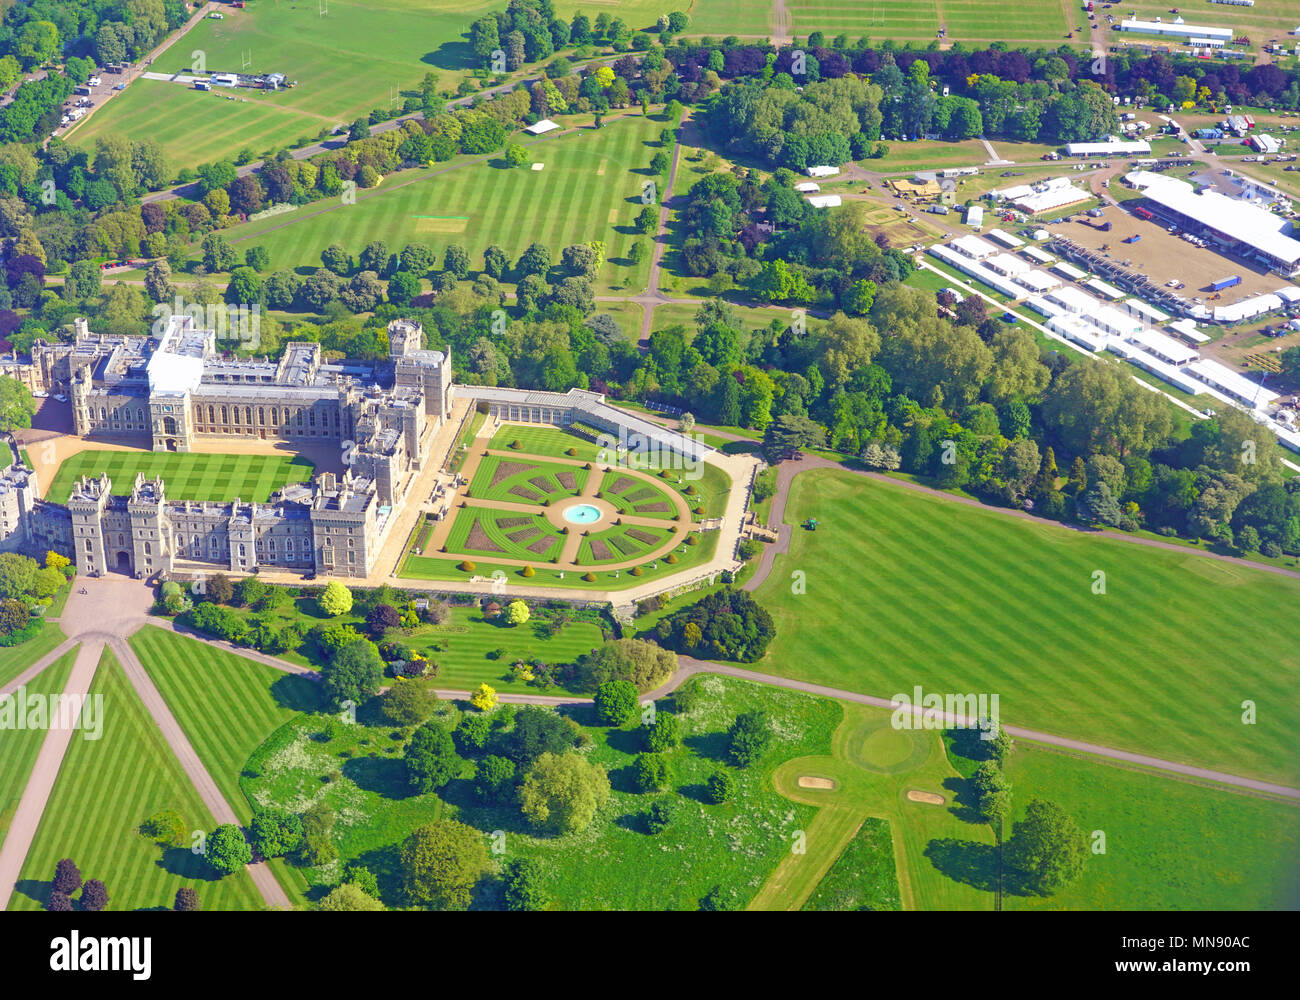 Aerial view of Windsor Castle and staging for the royal wedding of Prince Harry and American actress Meghan Markle to take place in May 2018. Stock Photo